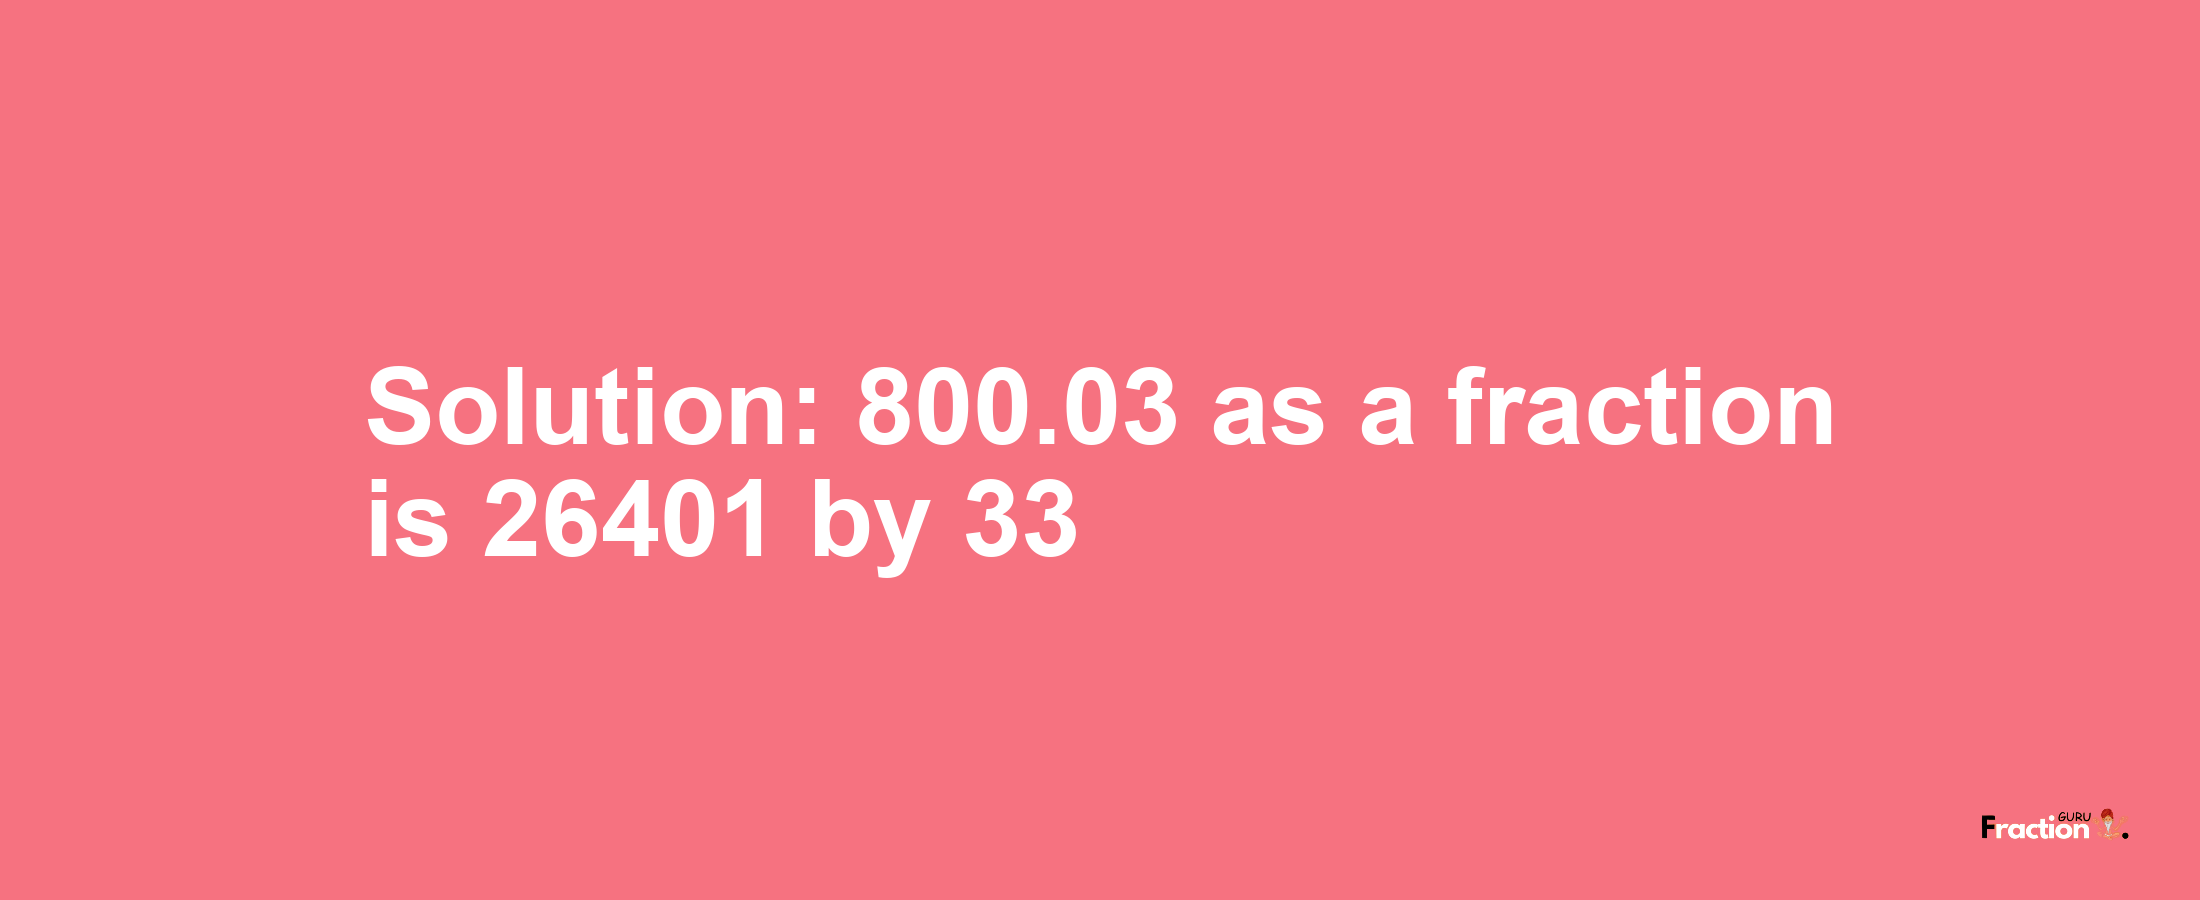 Solution:800.03 as a fraction is 26401/33